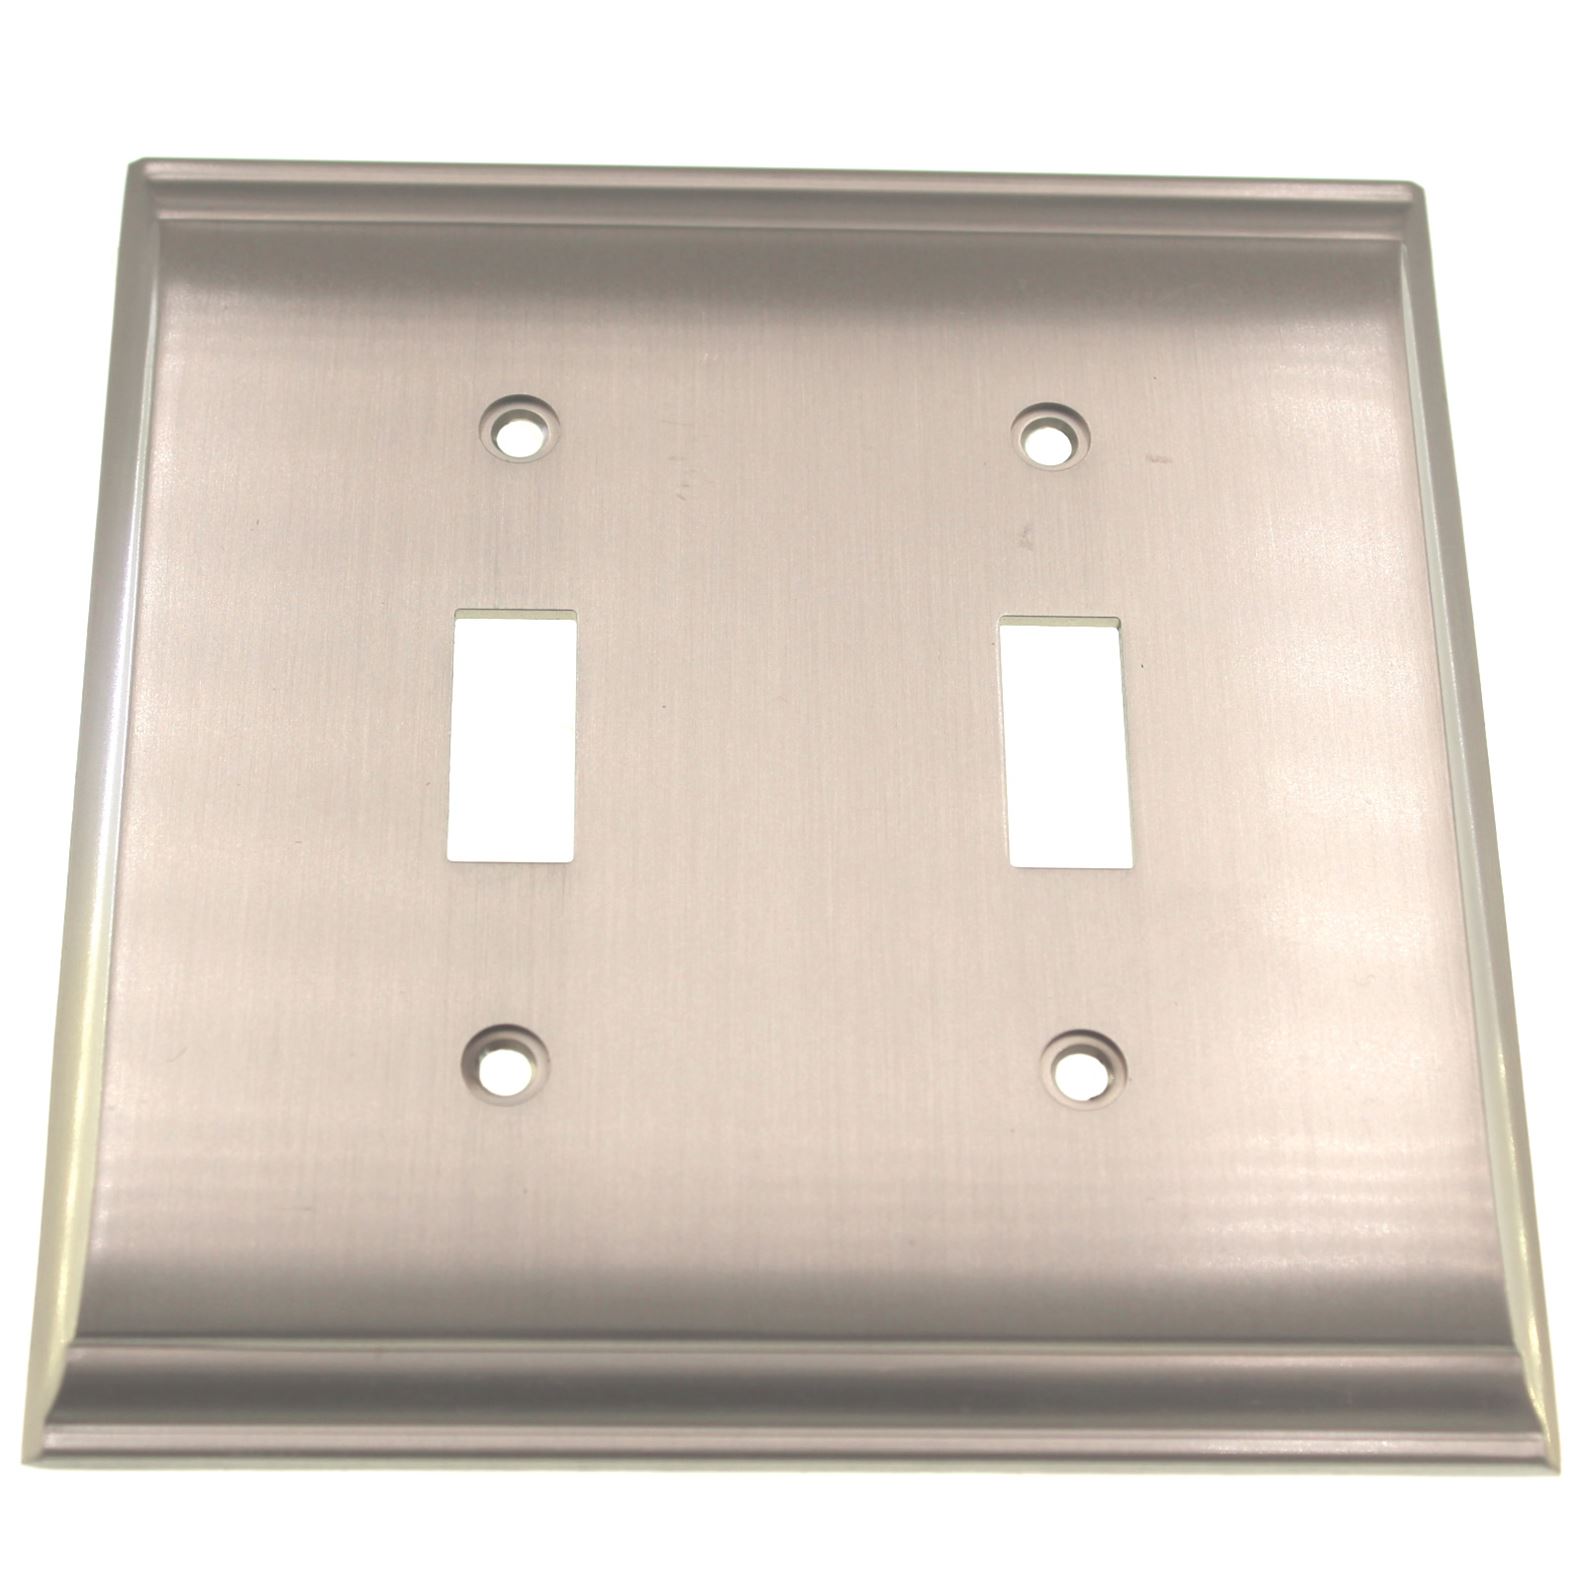 Amerock Candler Satin Nickel 2 Toggle Light Switch Wall Plate BP36501G10